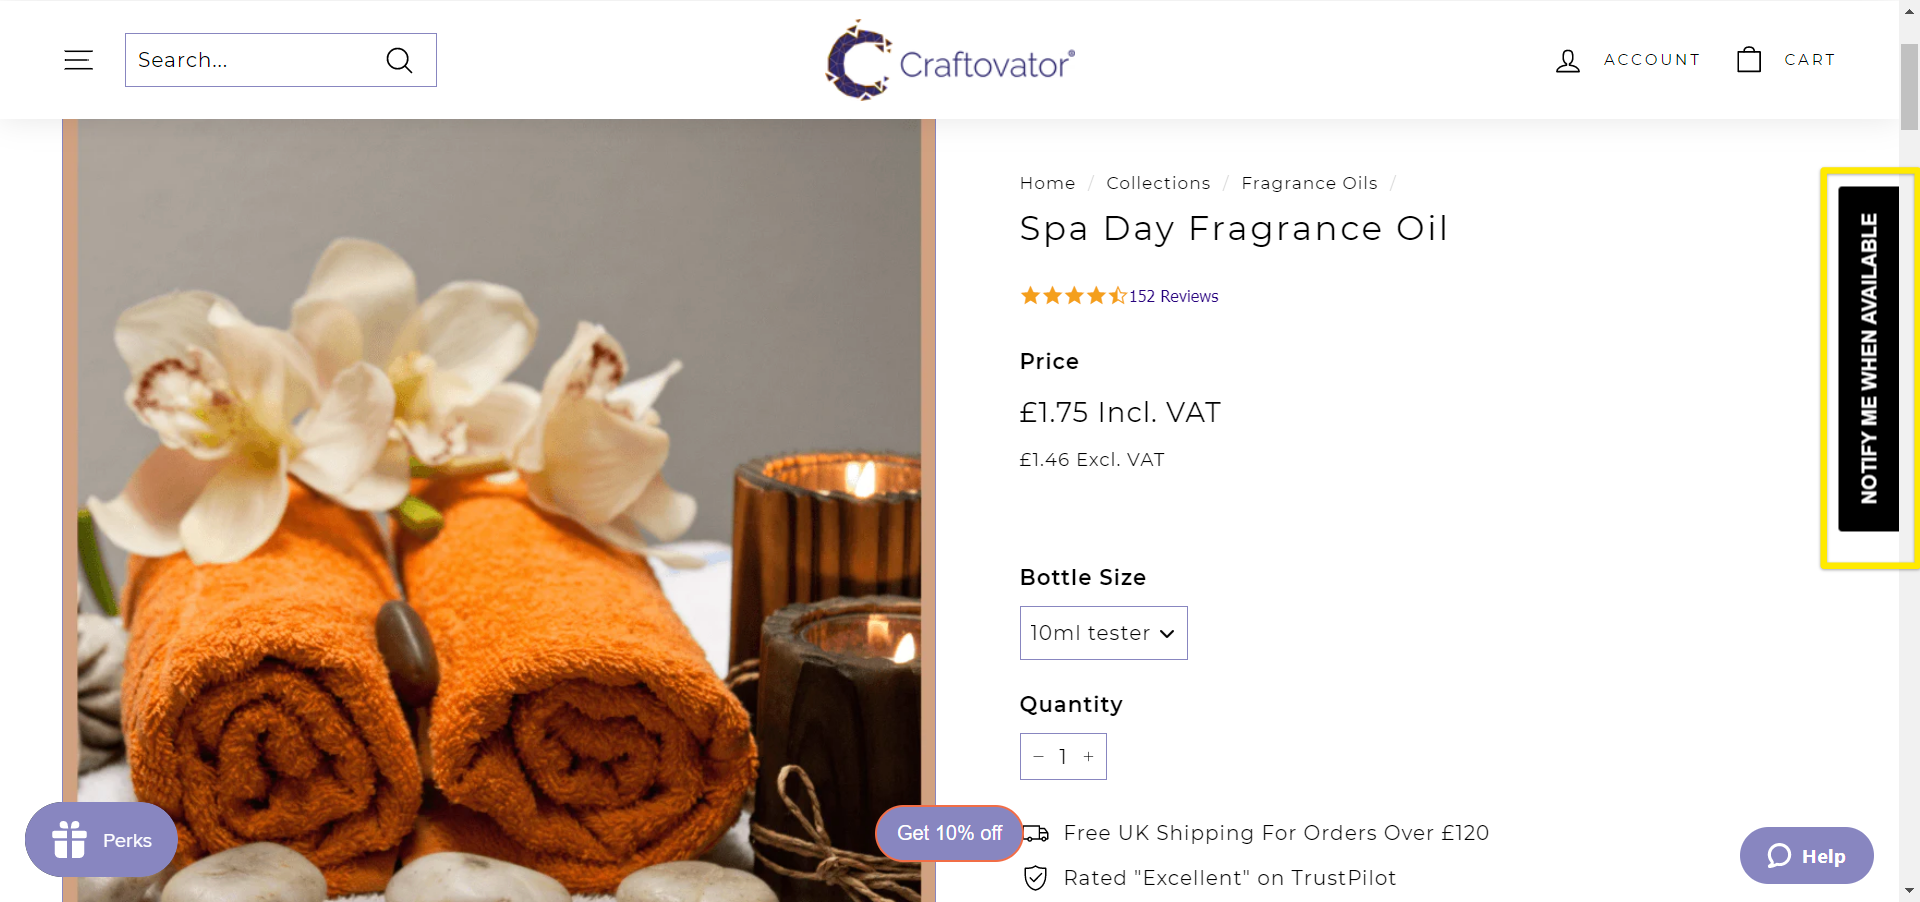 Spa_Day_Fragrance_Oil_-_The_UK-s_Most_Trusted_Supplier_-_Wholesale_Craftovator__2023-02-01_11-12-01.png